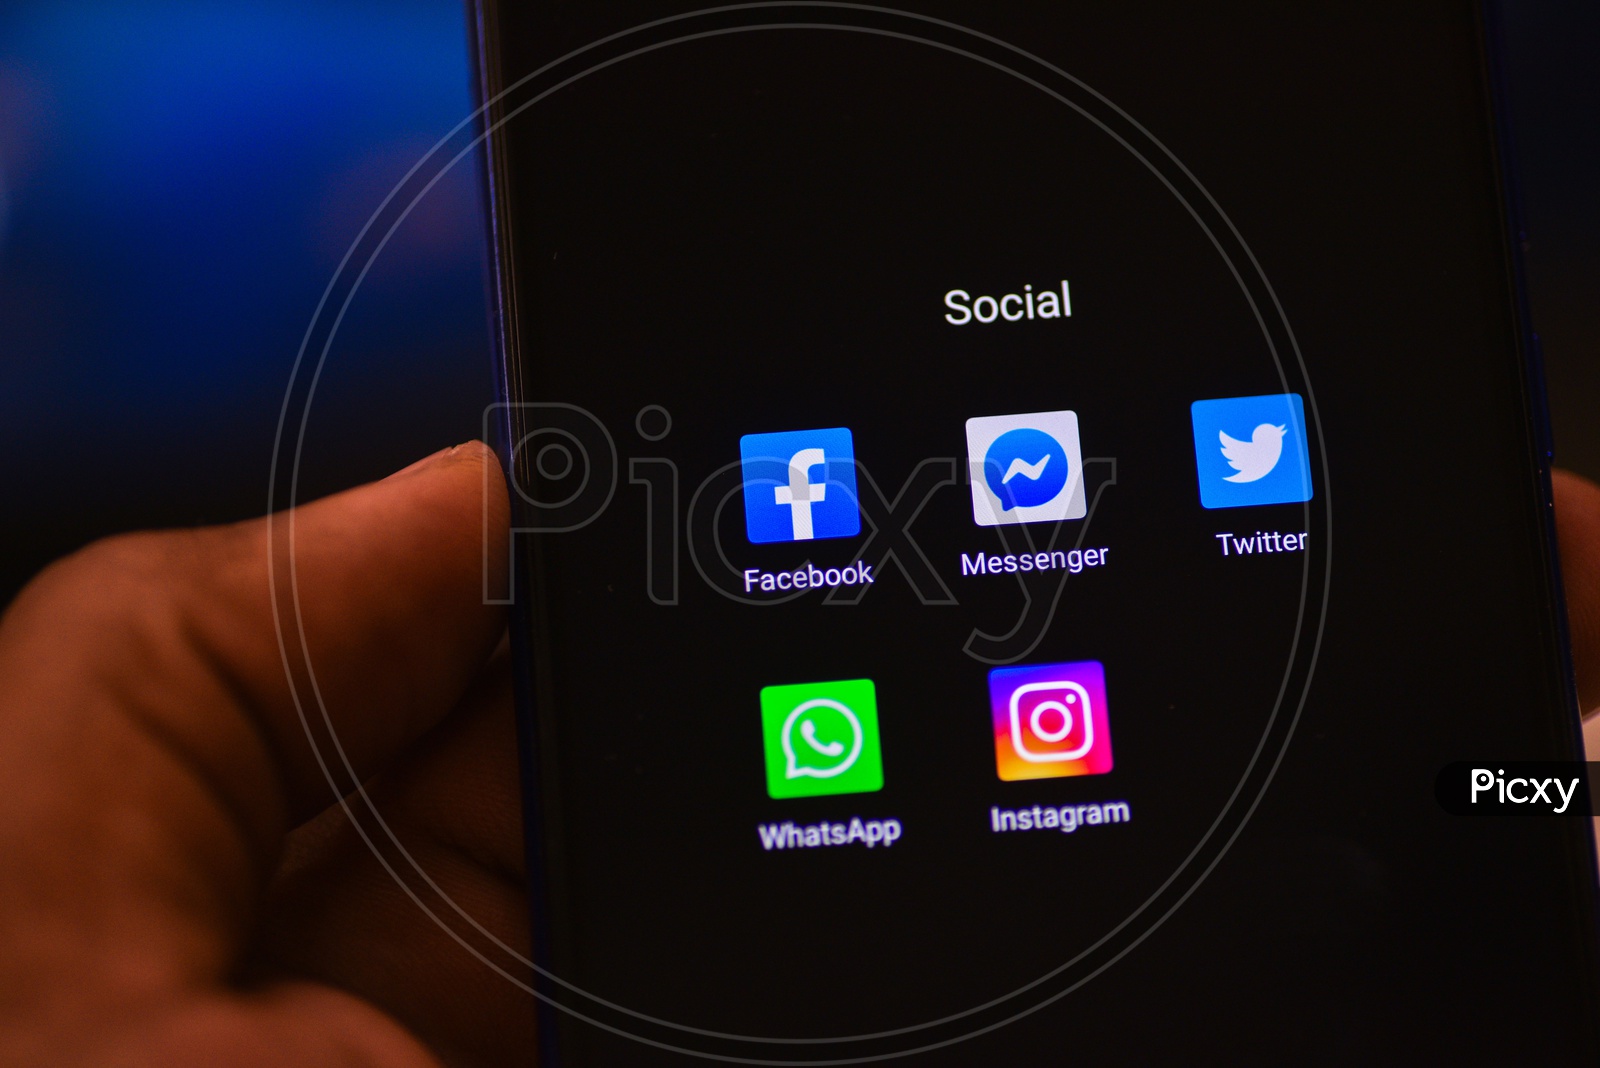 Social Networking Apps Installed Icons On a Smartphone Screen Closeup With Selective Focus on Twitter